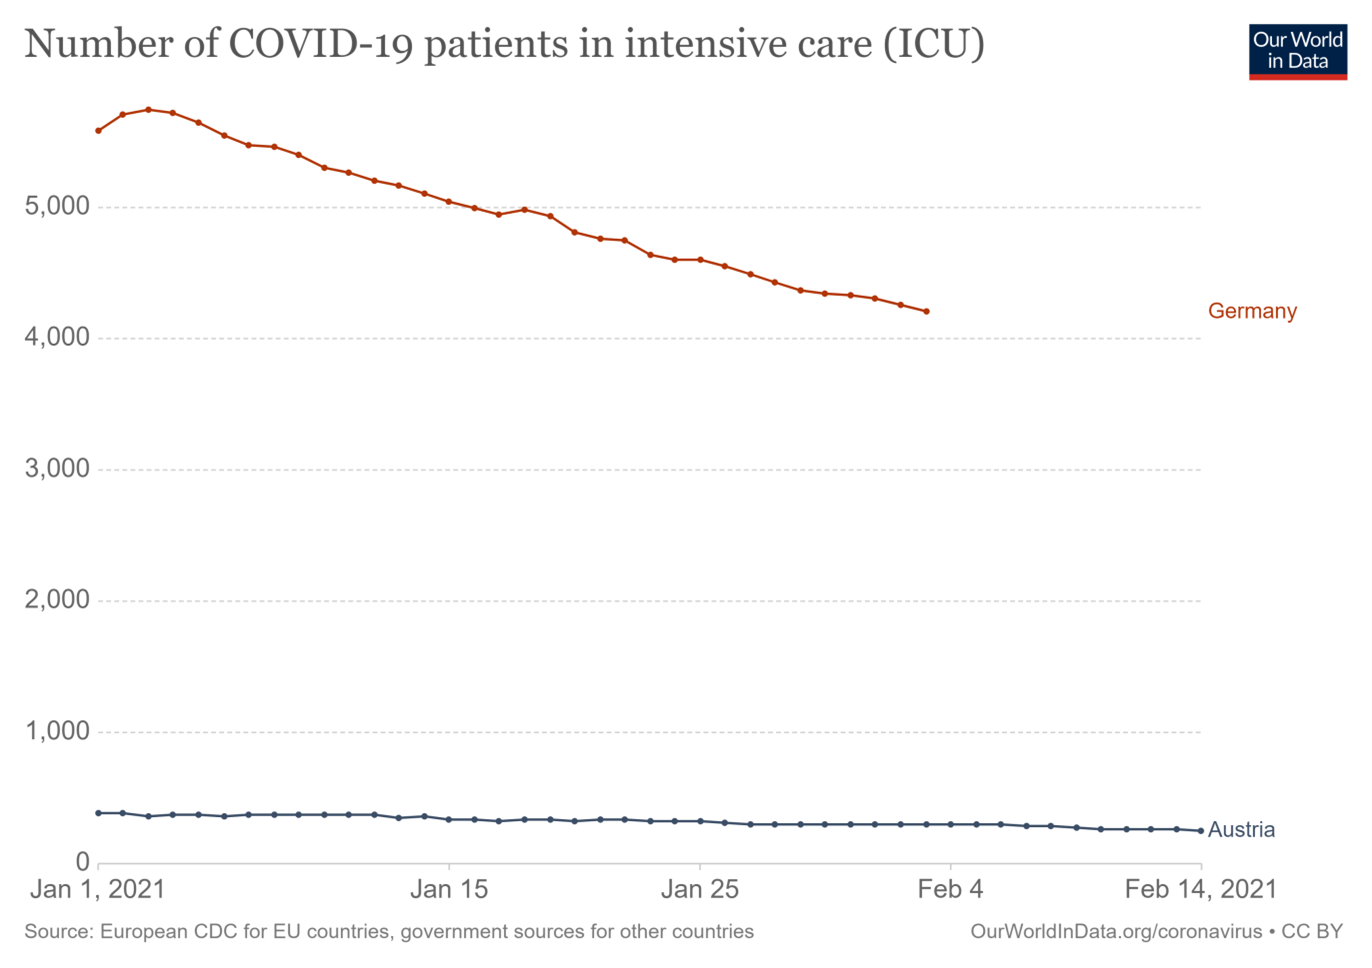 Quelle: John Hopkins University CSSE COVID-19 Data/14 February, Coronavirus Pandemic Data Explorer – Our World in Data/Number of COVID-19 patients in intensive care (ICU)